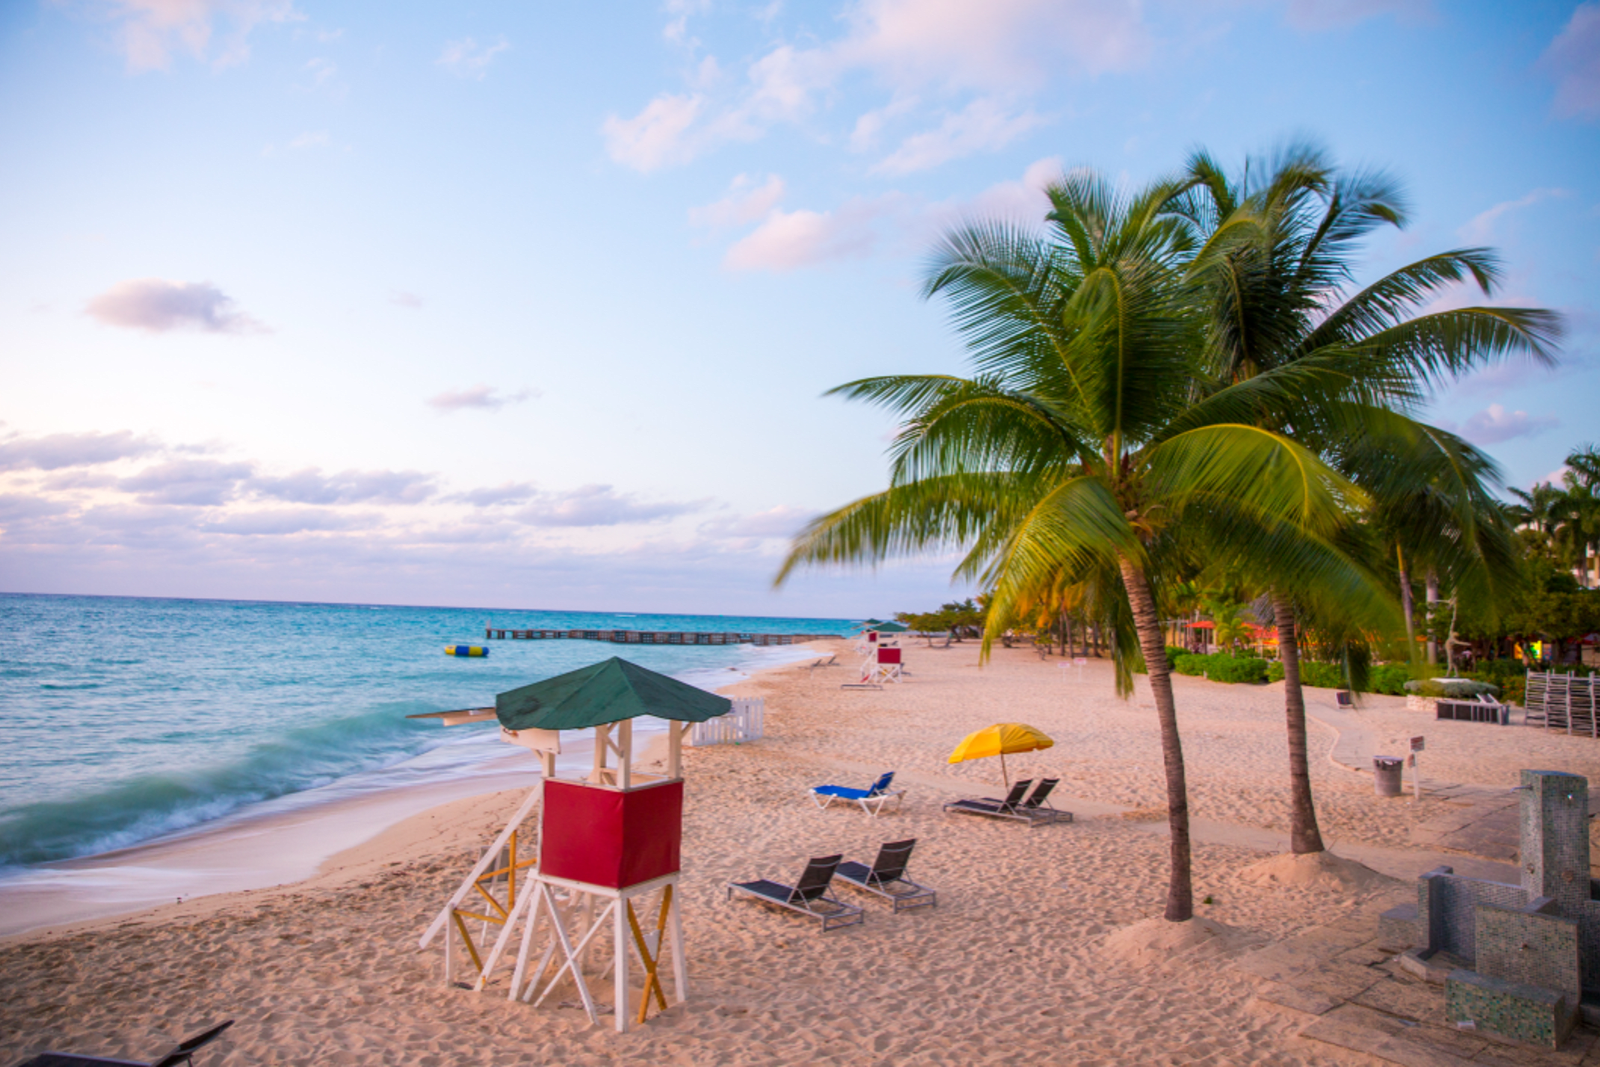 Jamaica is one of the best Spring Break destinations for families